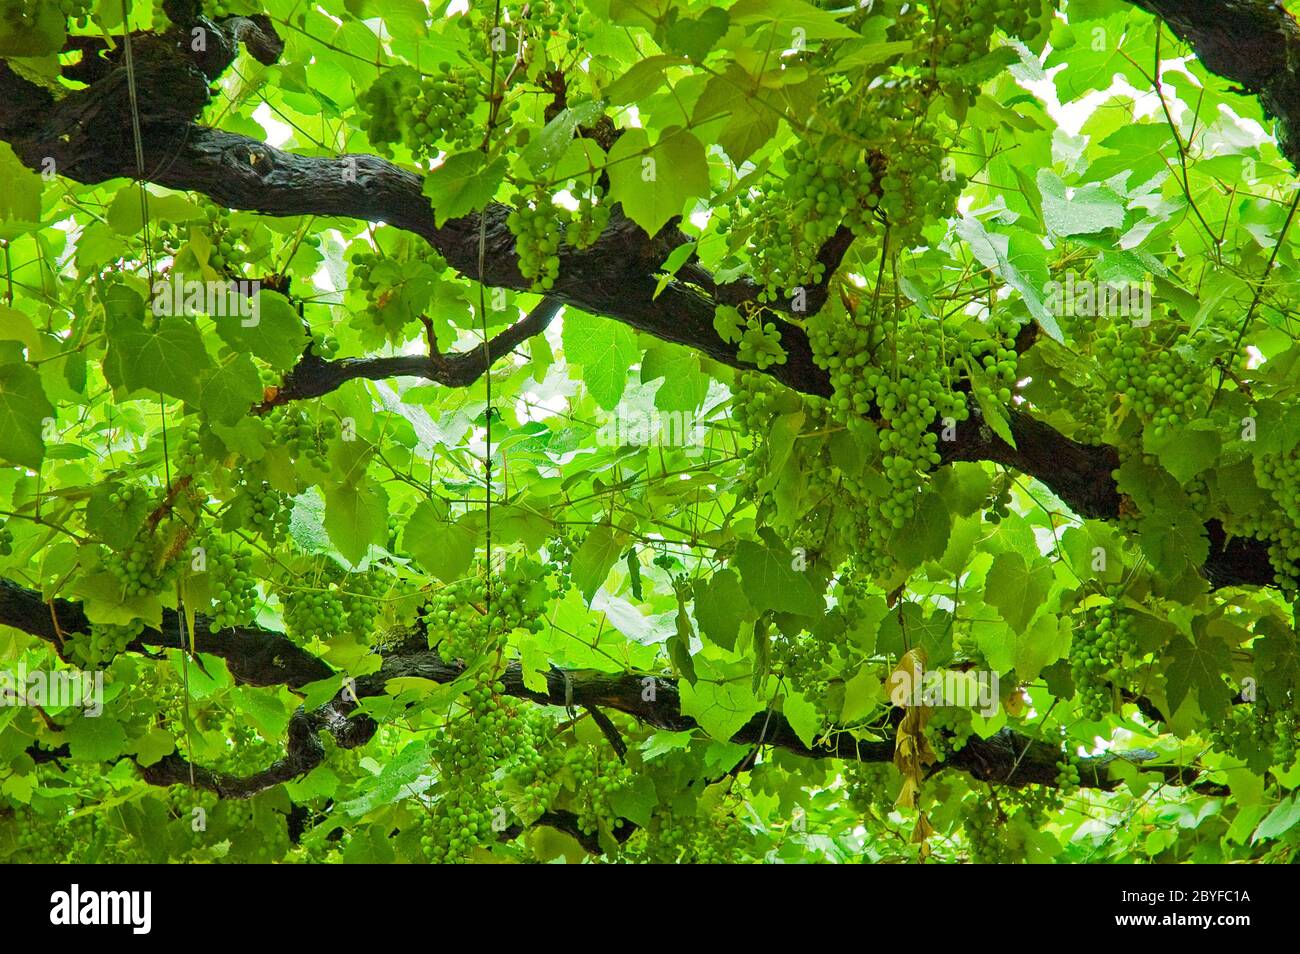 background of grape leaves Stock Photo